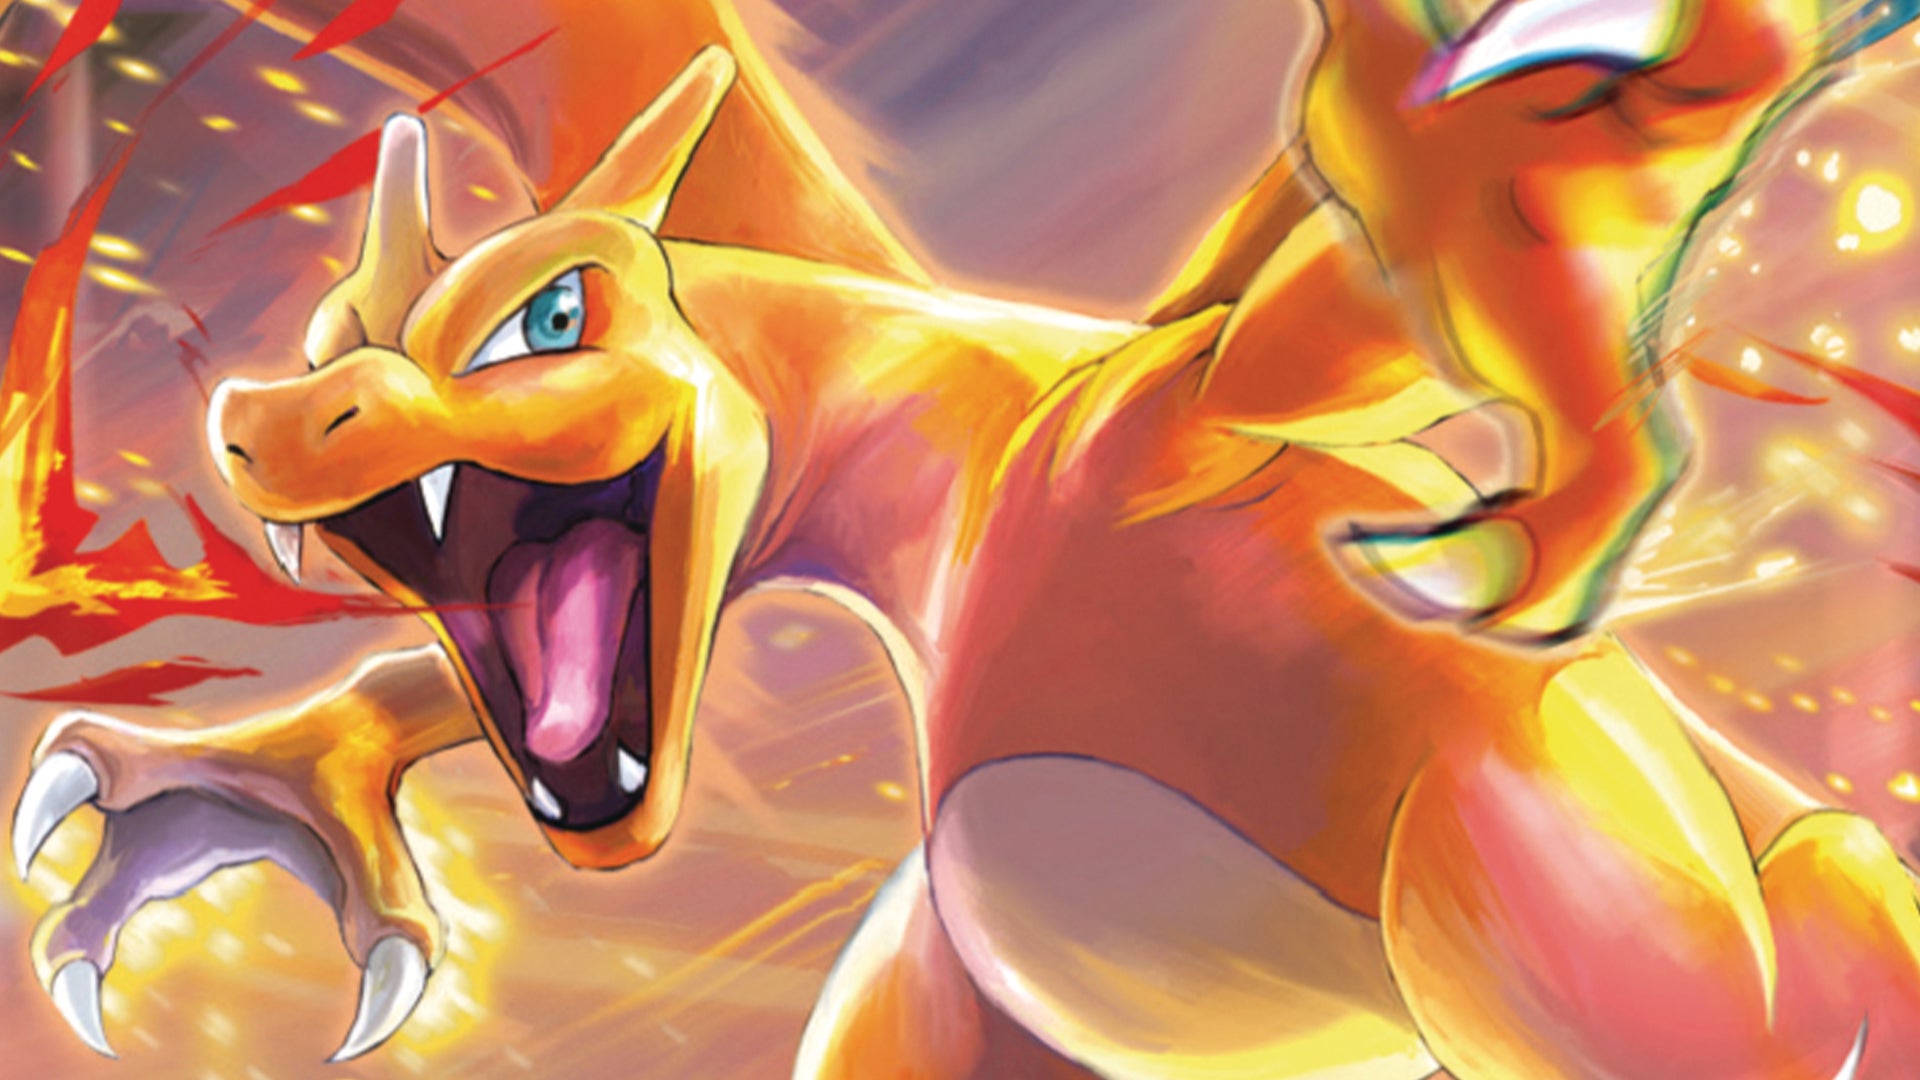 20 Easy Pokémon To Draw: A List For Artists With Step-By-Step Tutorials